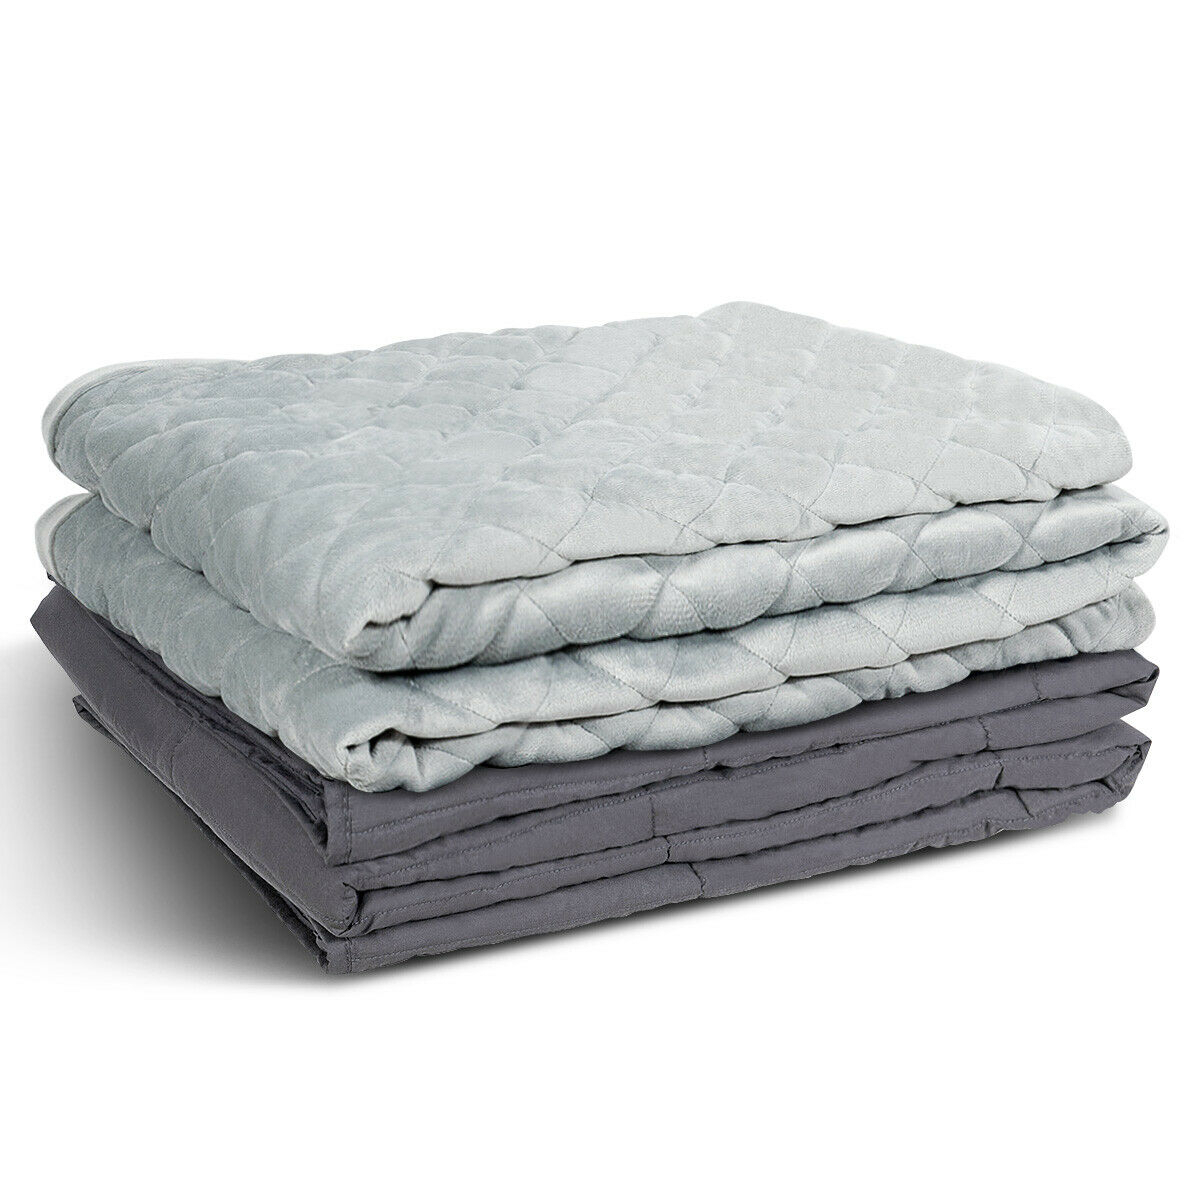 48x72 15lbs/20lbs Queen/King Size Weighted Blanket Soft Cotton Quilt W/ Carrying Bag - 48x72 20lbs